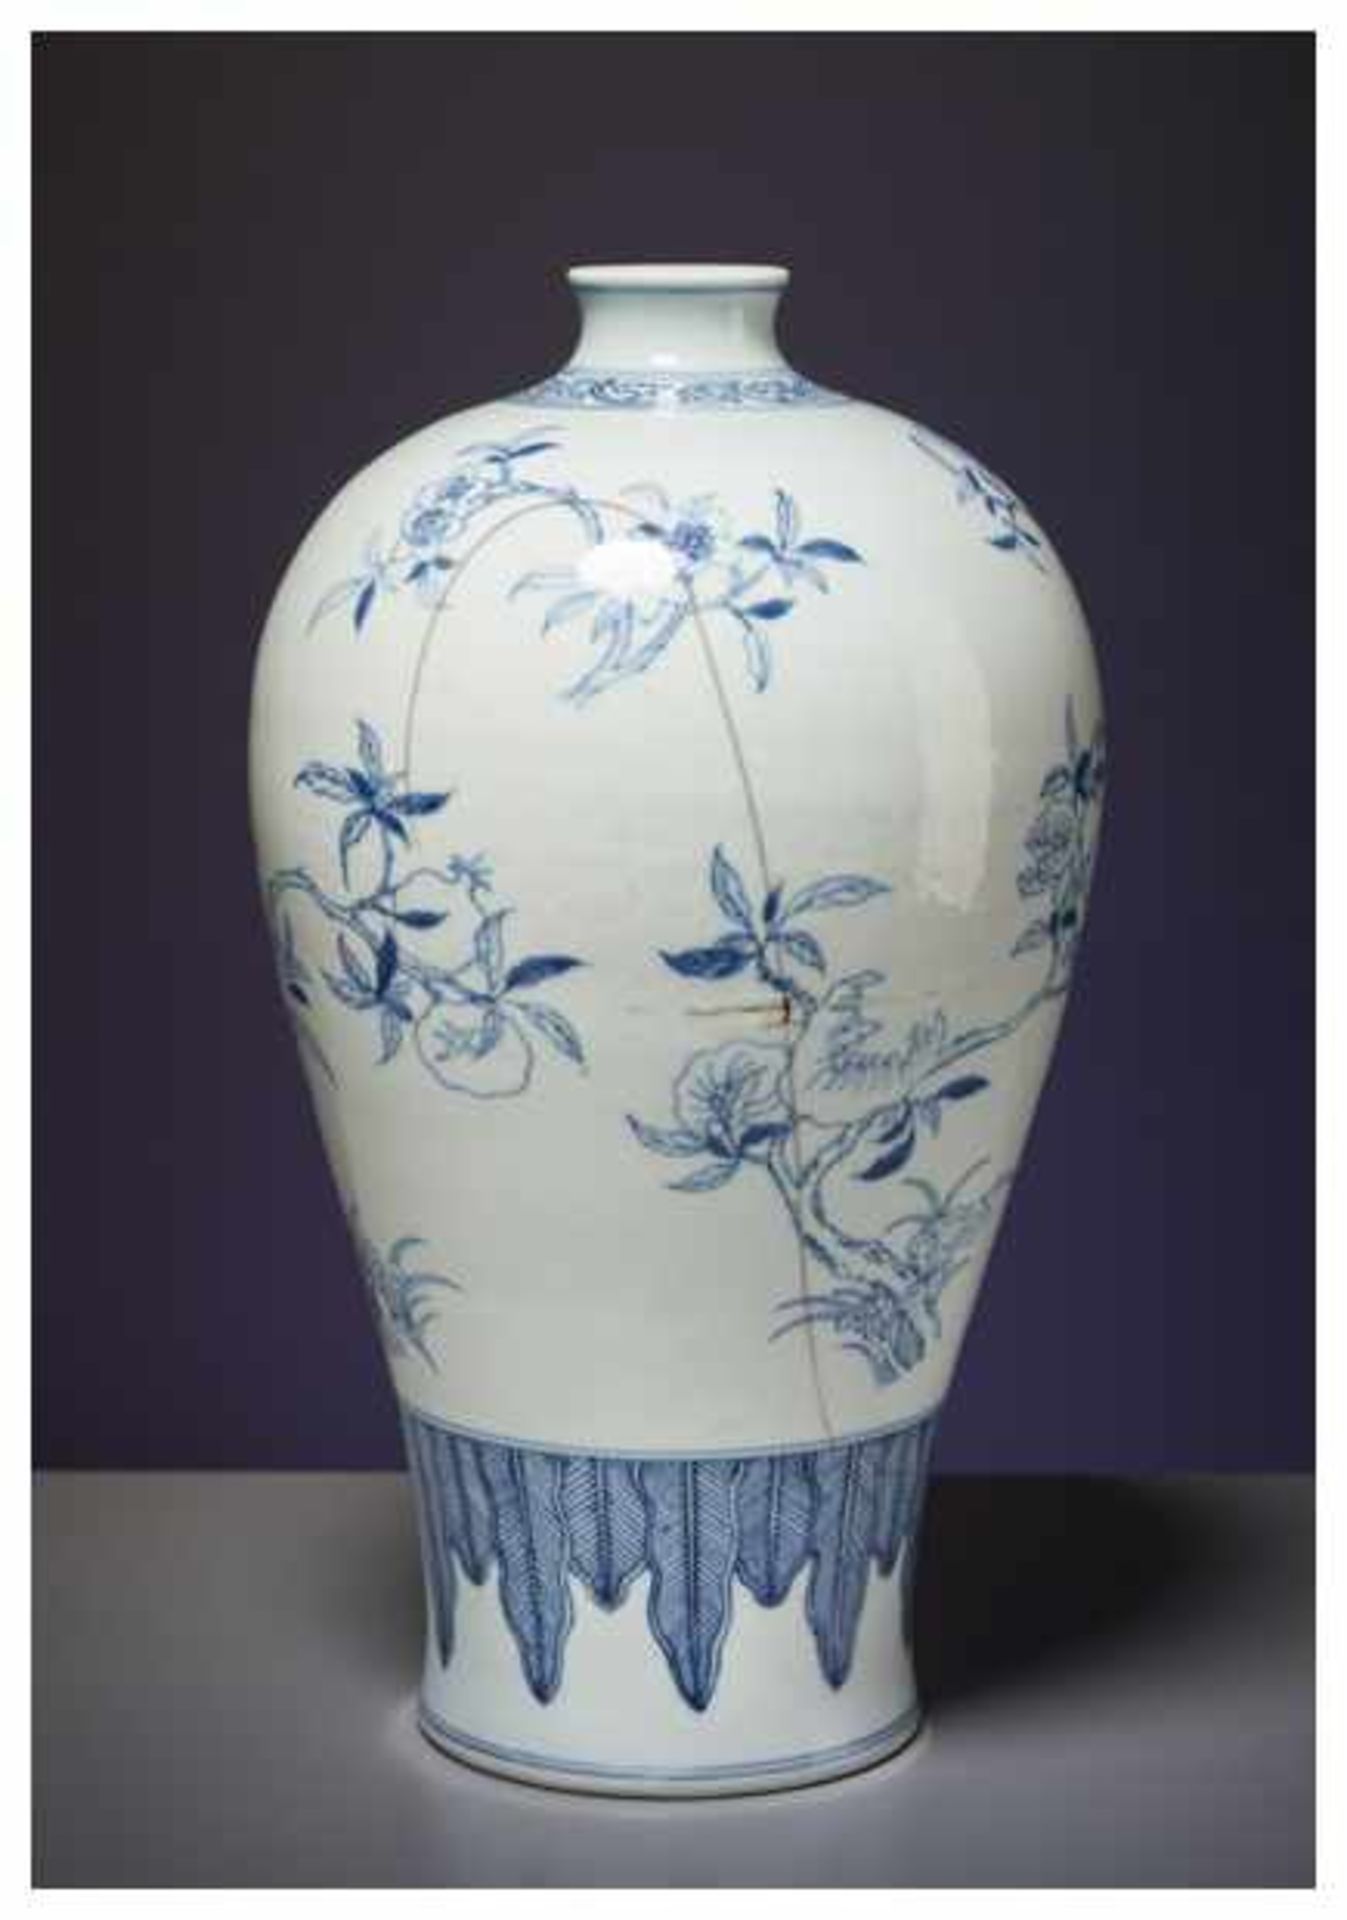 A CHINESE BLUE AND WHITE PORCELAIN BALUSTER VASE Porcelain with blue and white painting. China, - Image 2 of 5